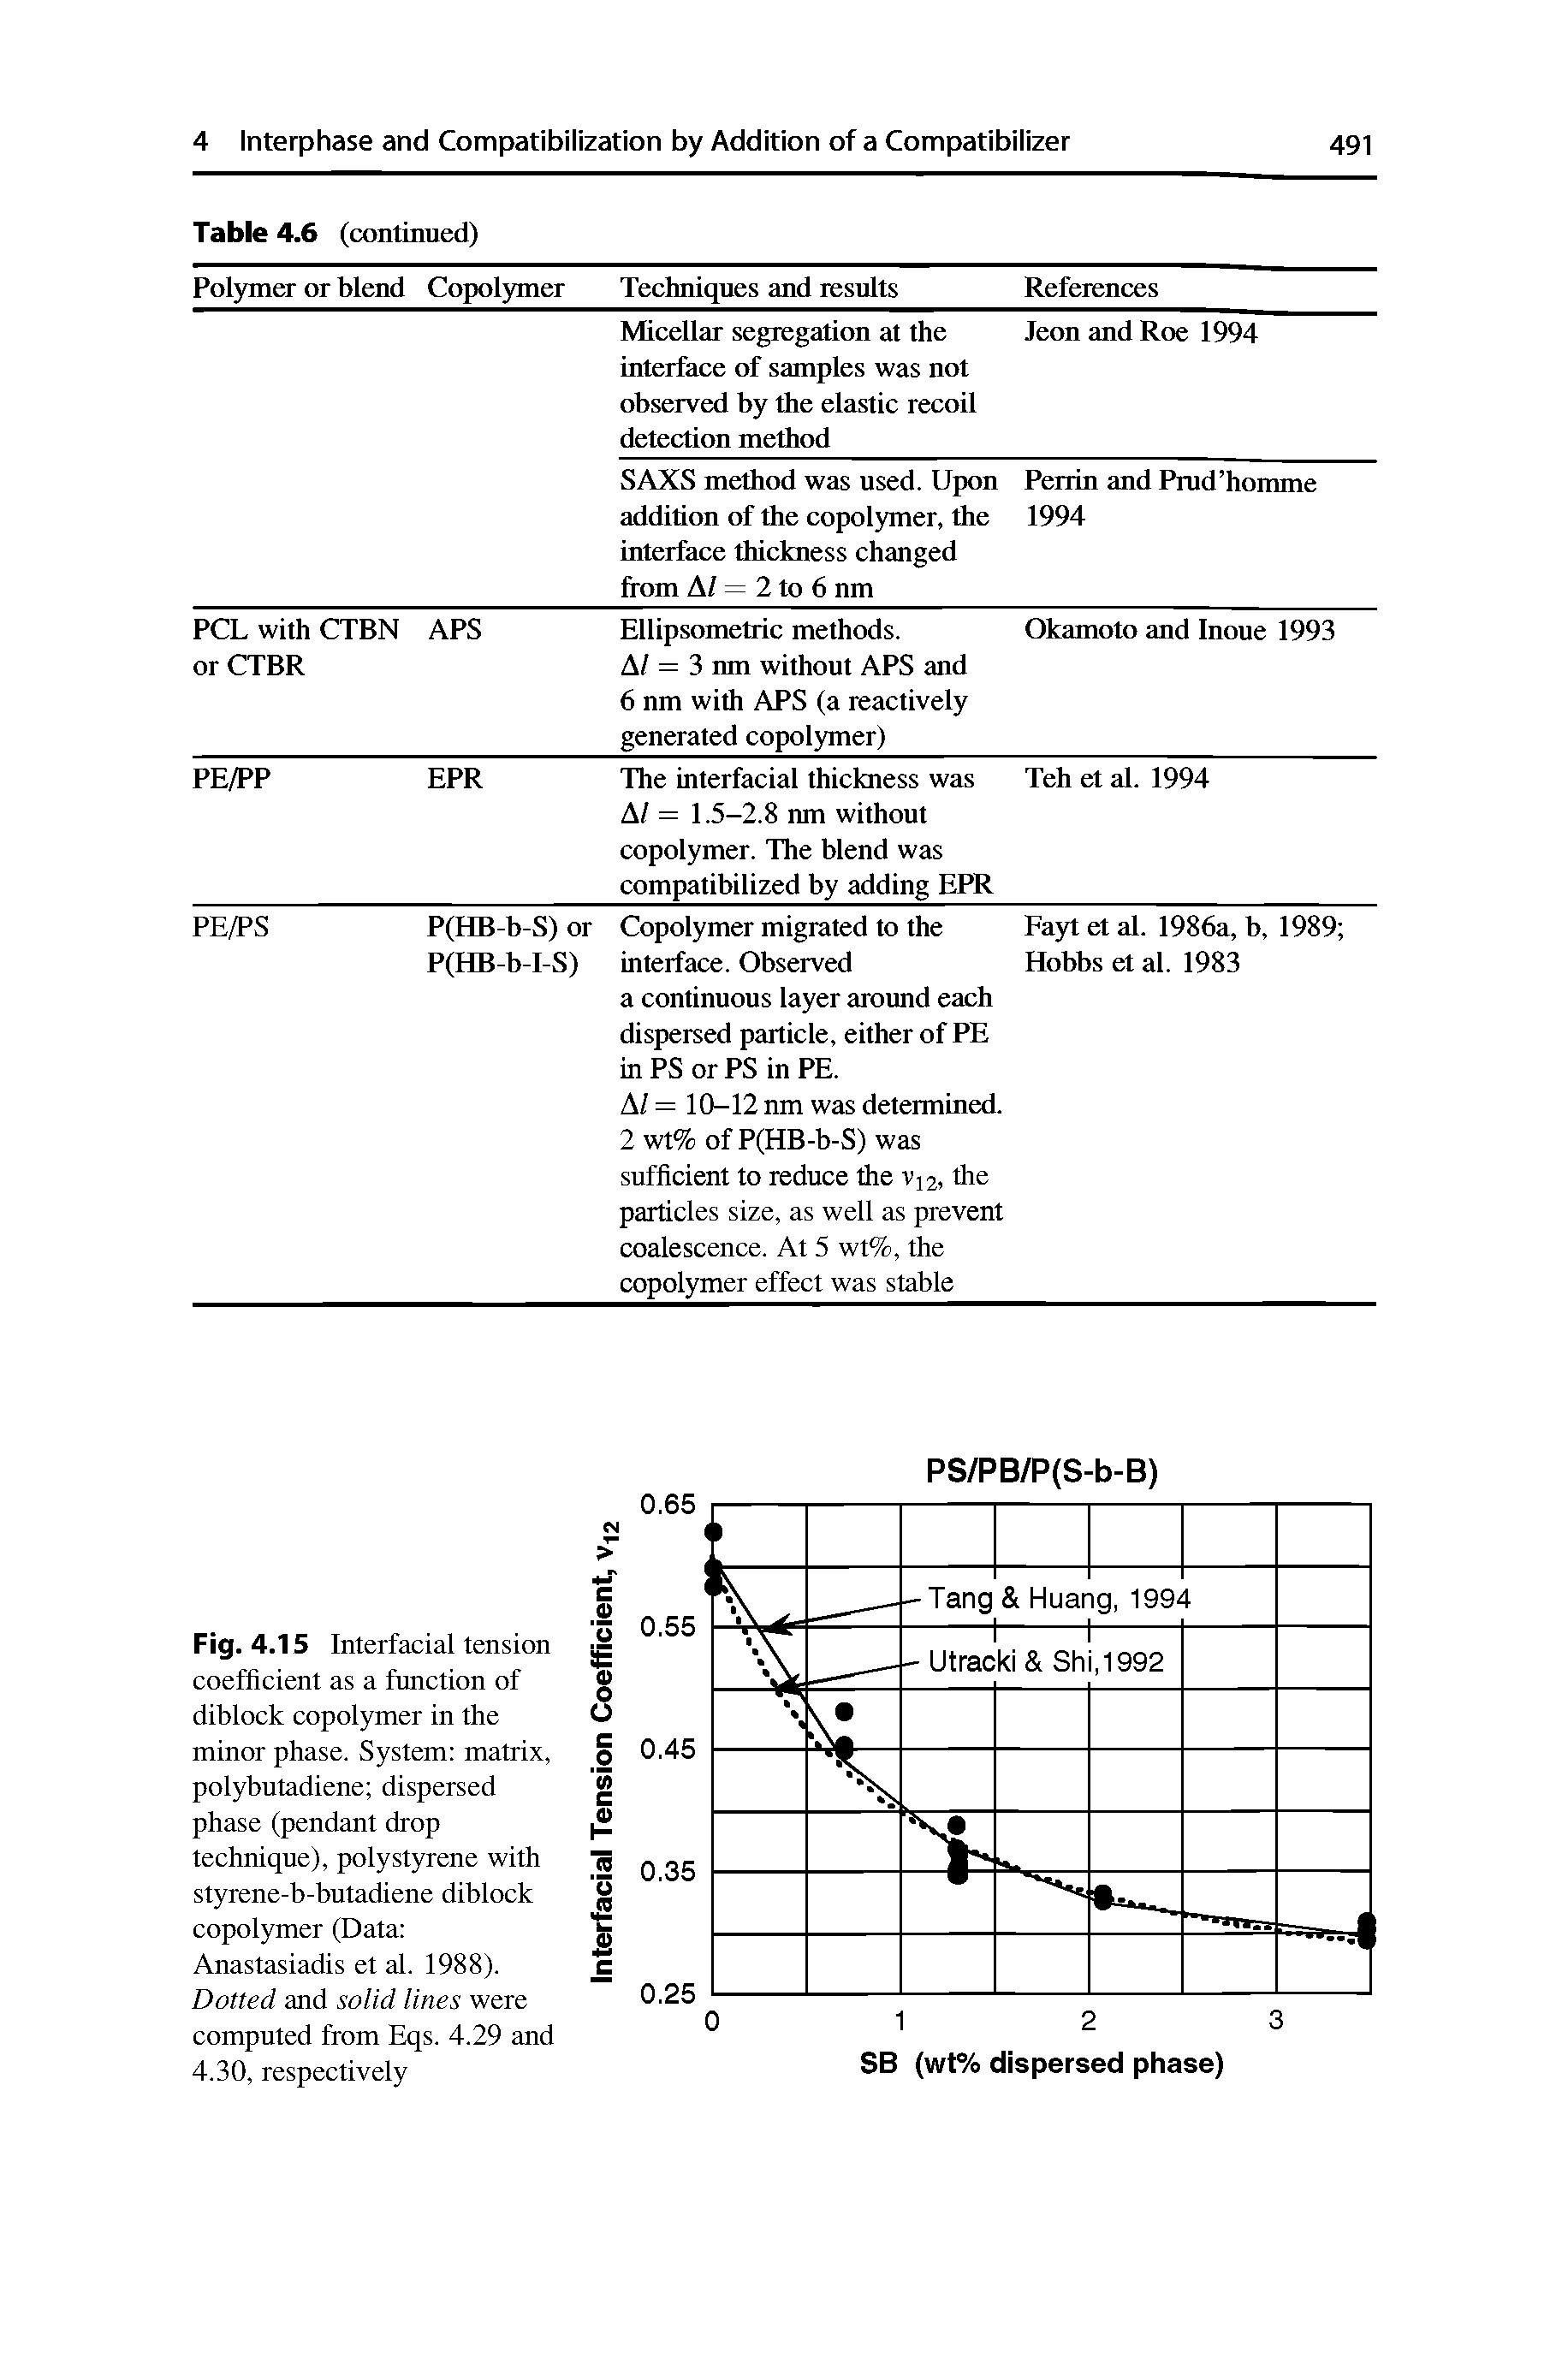 Fig. 4.15 Interfacial tension coefficient as a function of diblock copolymer in the minor phase. System matrix, polybutadiene dispersed phase (pendant drop technique), polystyrene with styrene-b-butadiene diblock copolymer (Data Anastasiadis et al. 1988). Dotted and solid lines were computed from Eqs. 4.29 and 4.30, respectively...